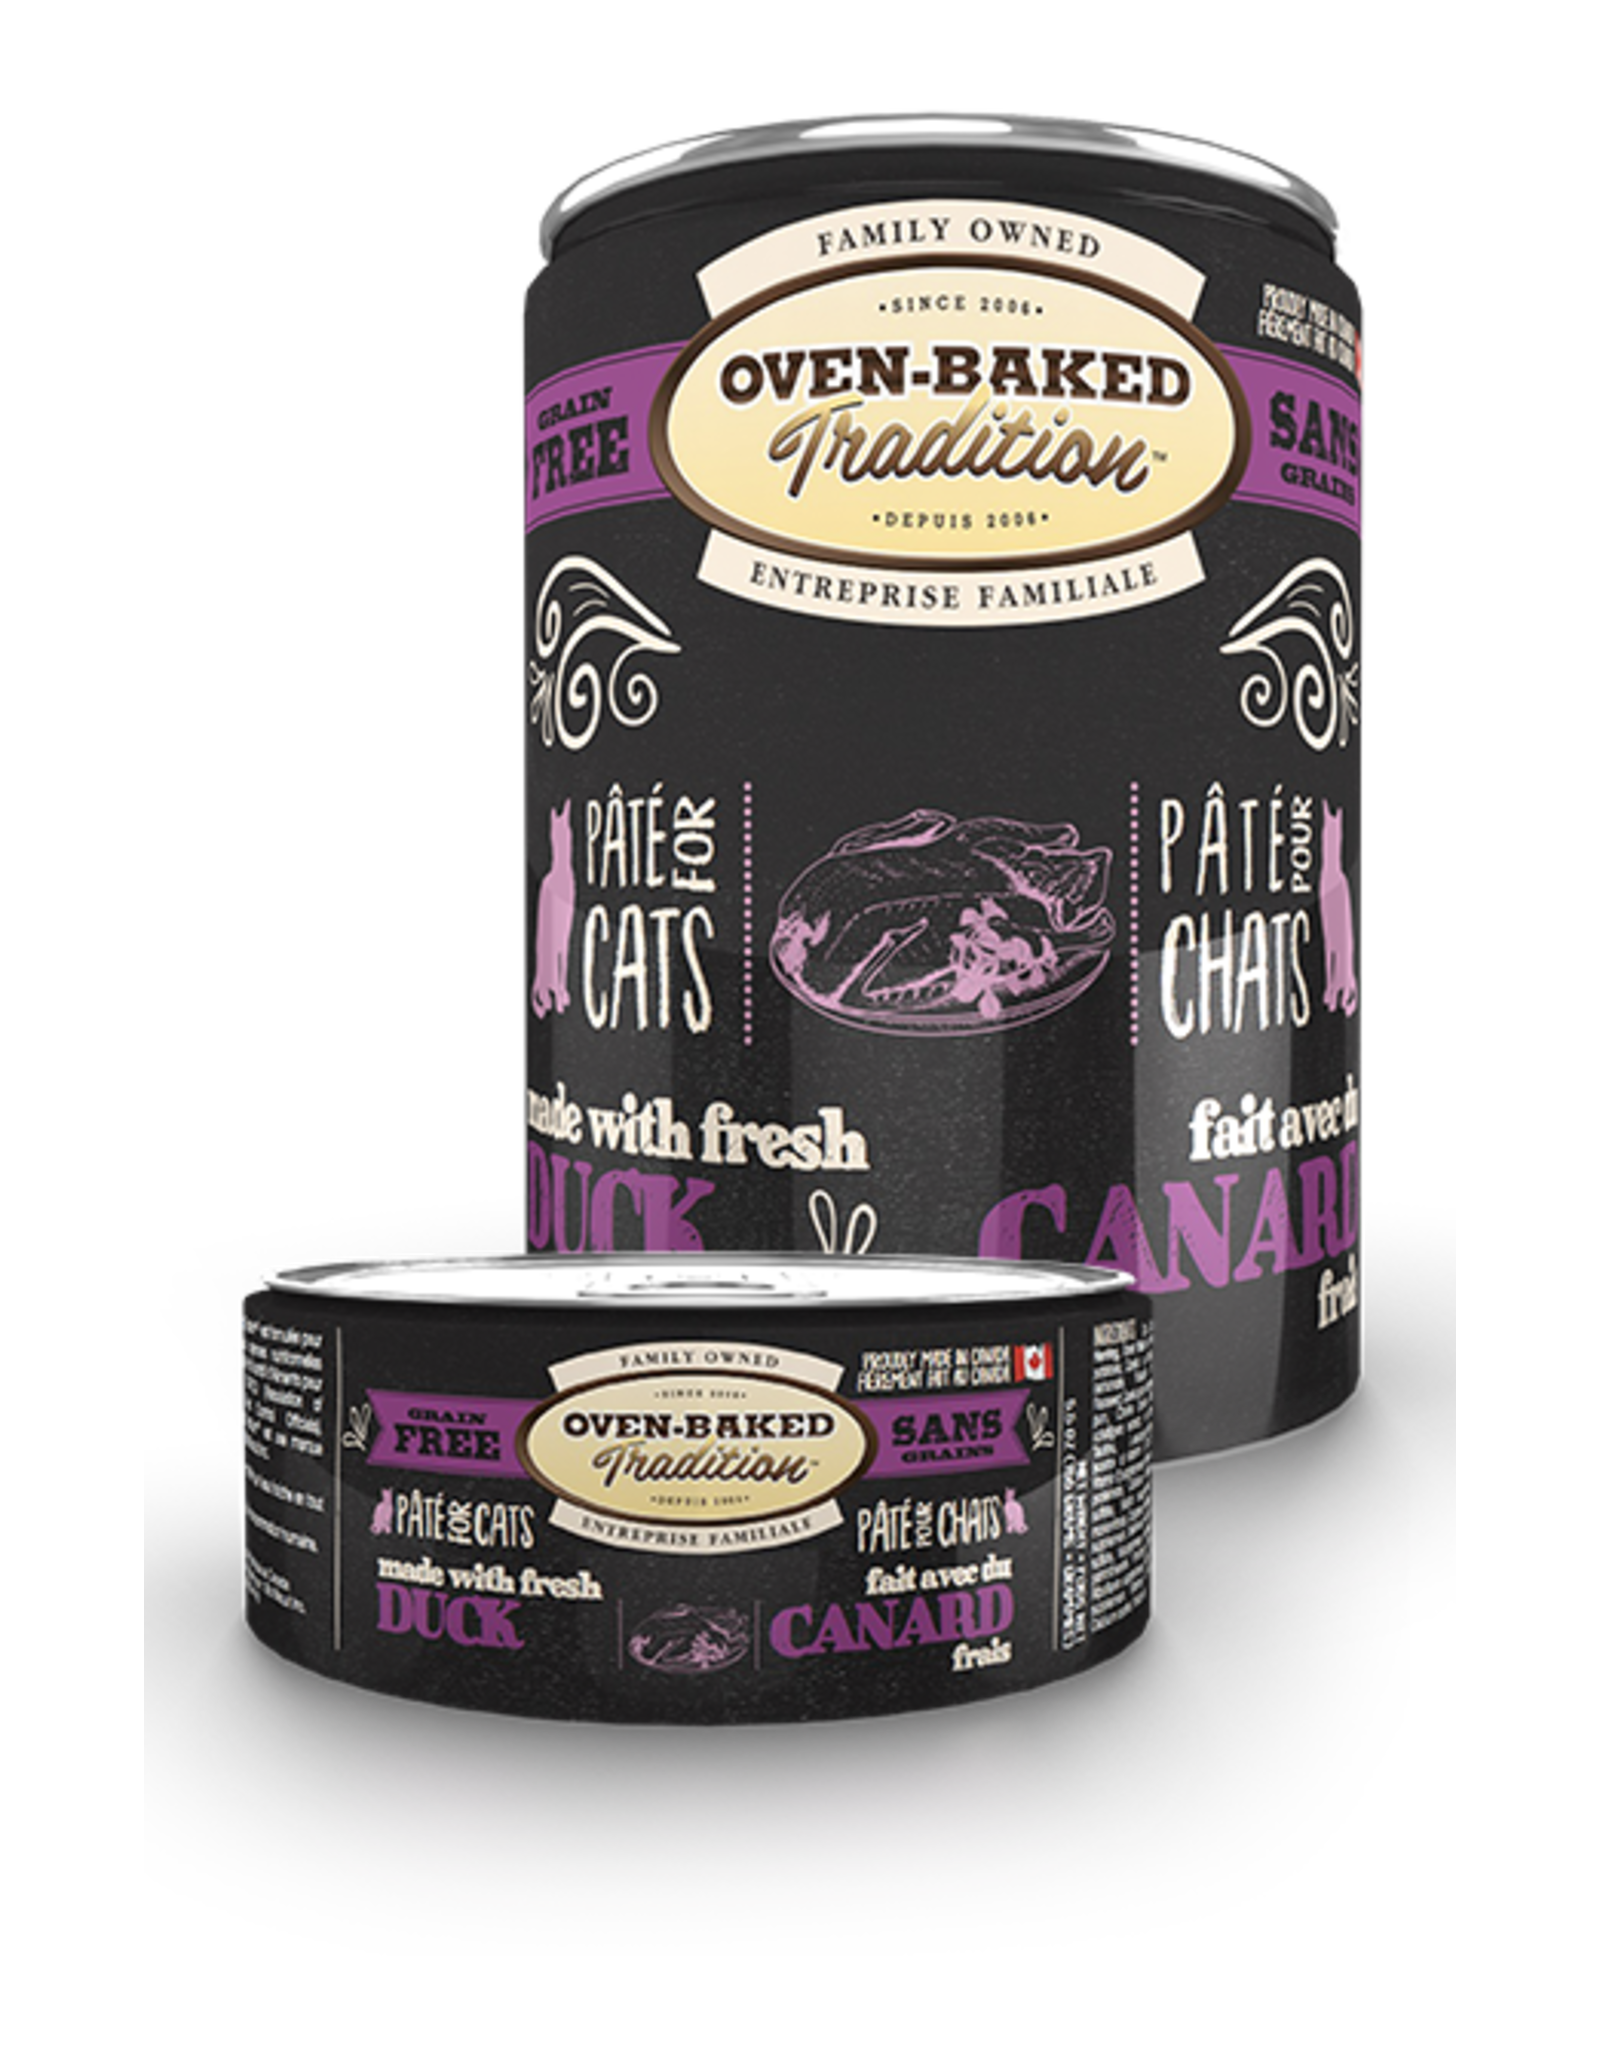 Oven-Baked Tradition Oven-Baked Paté Canard 5.5oz (Chat)